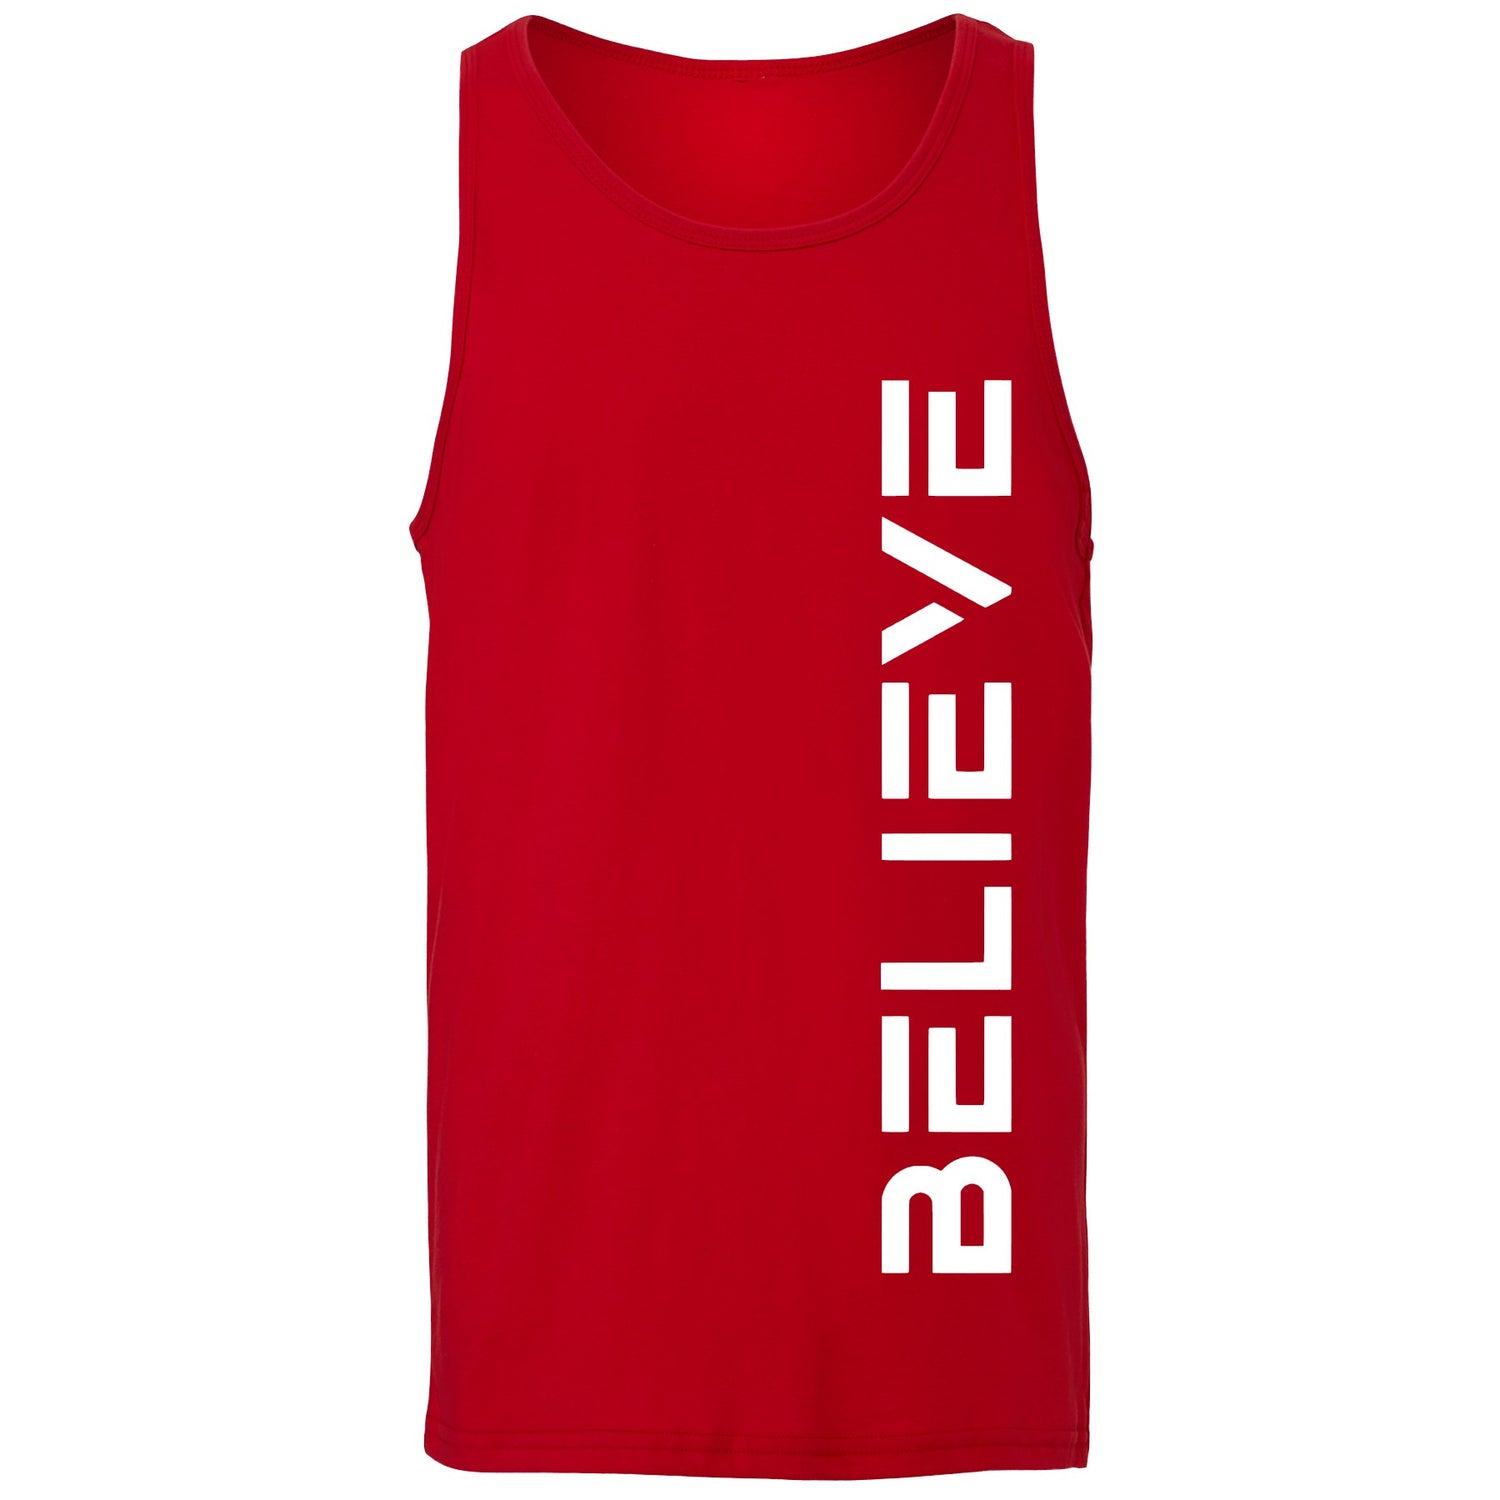 Profyle District - Believe - Tanks - Red